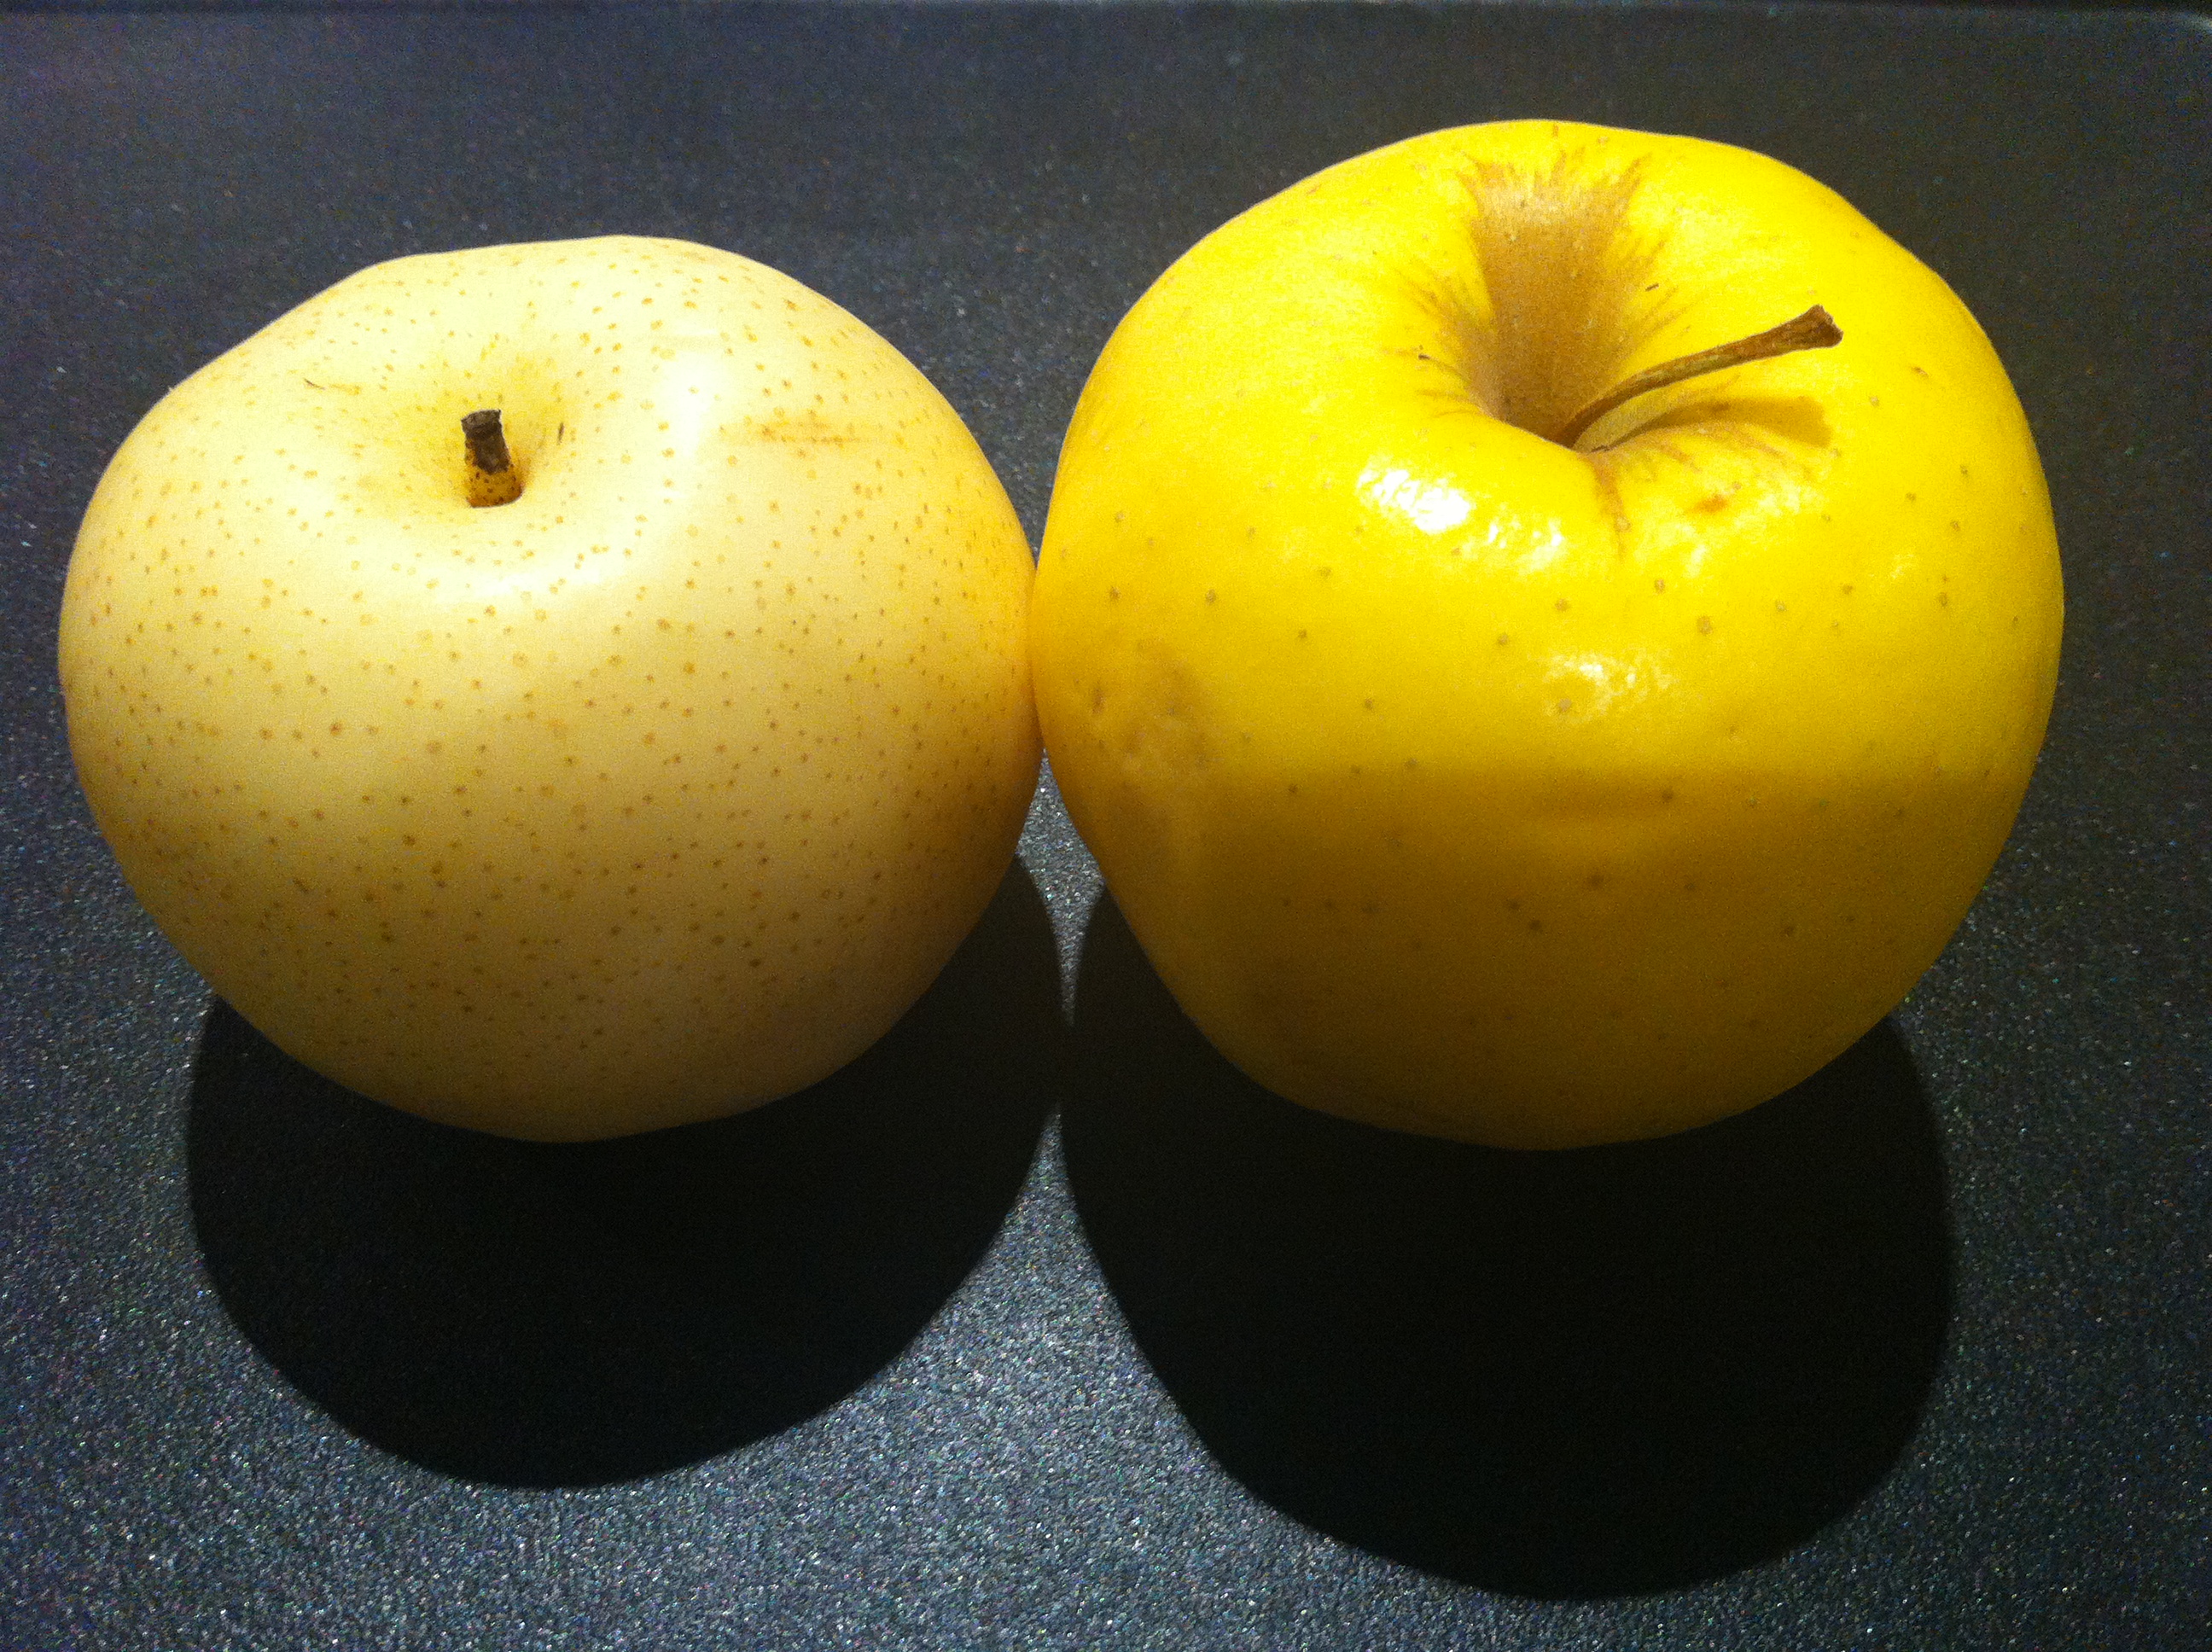 The one on the left is the Asian pear... The one on the right is the apple.